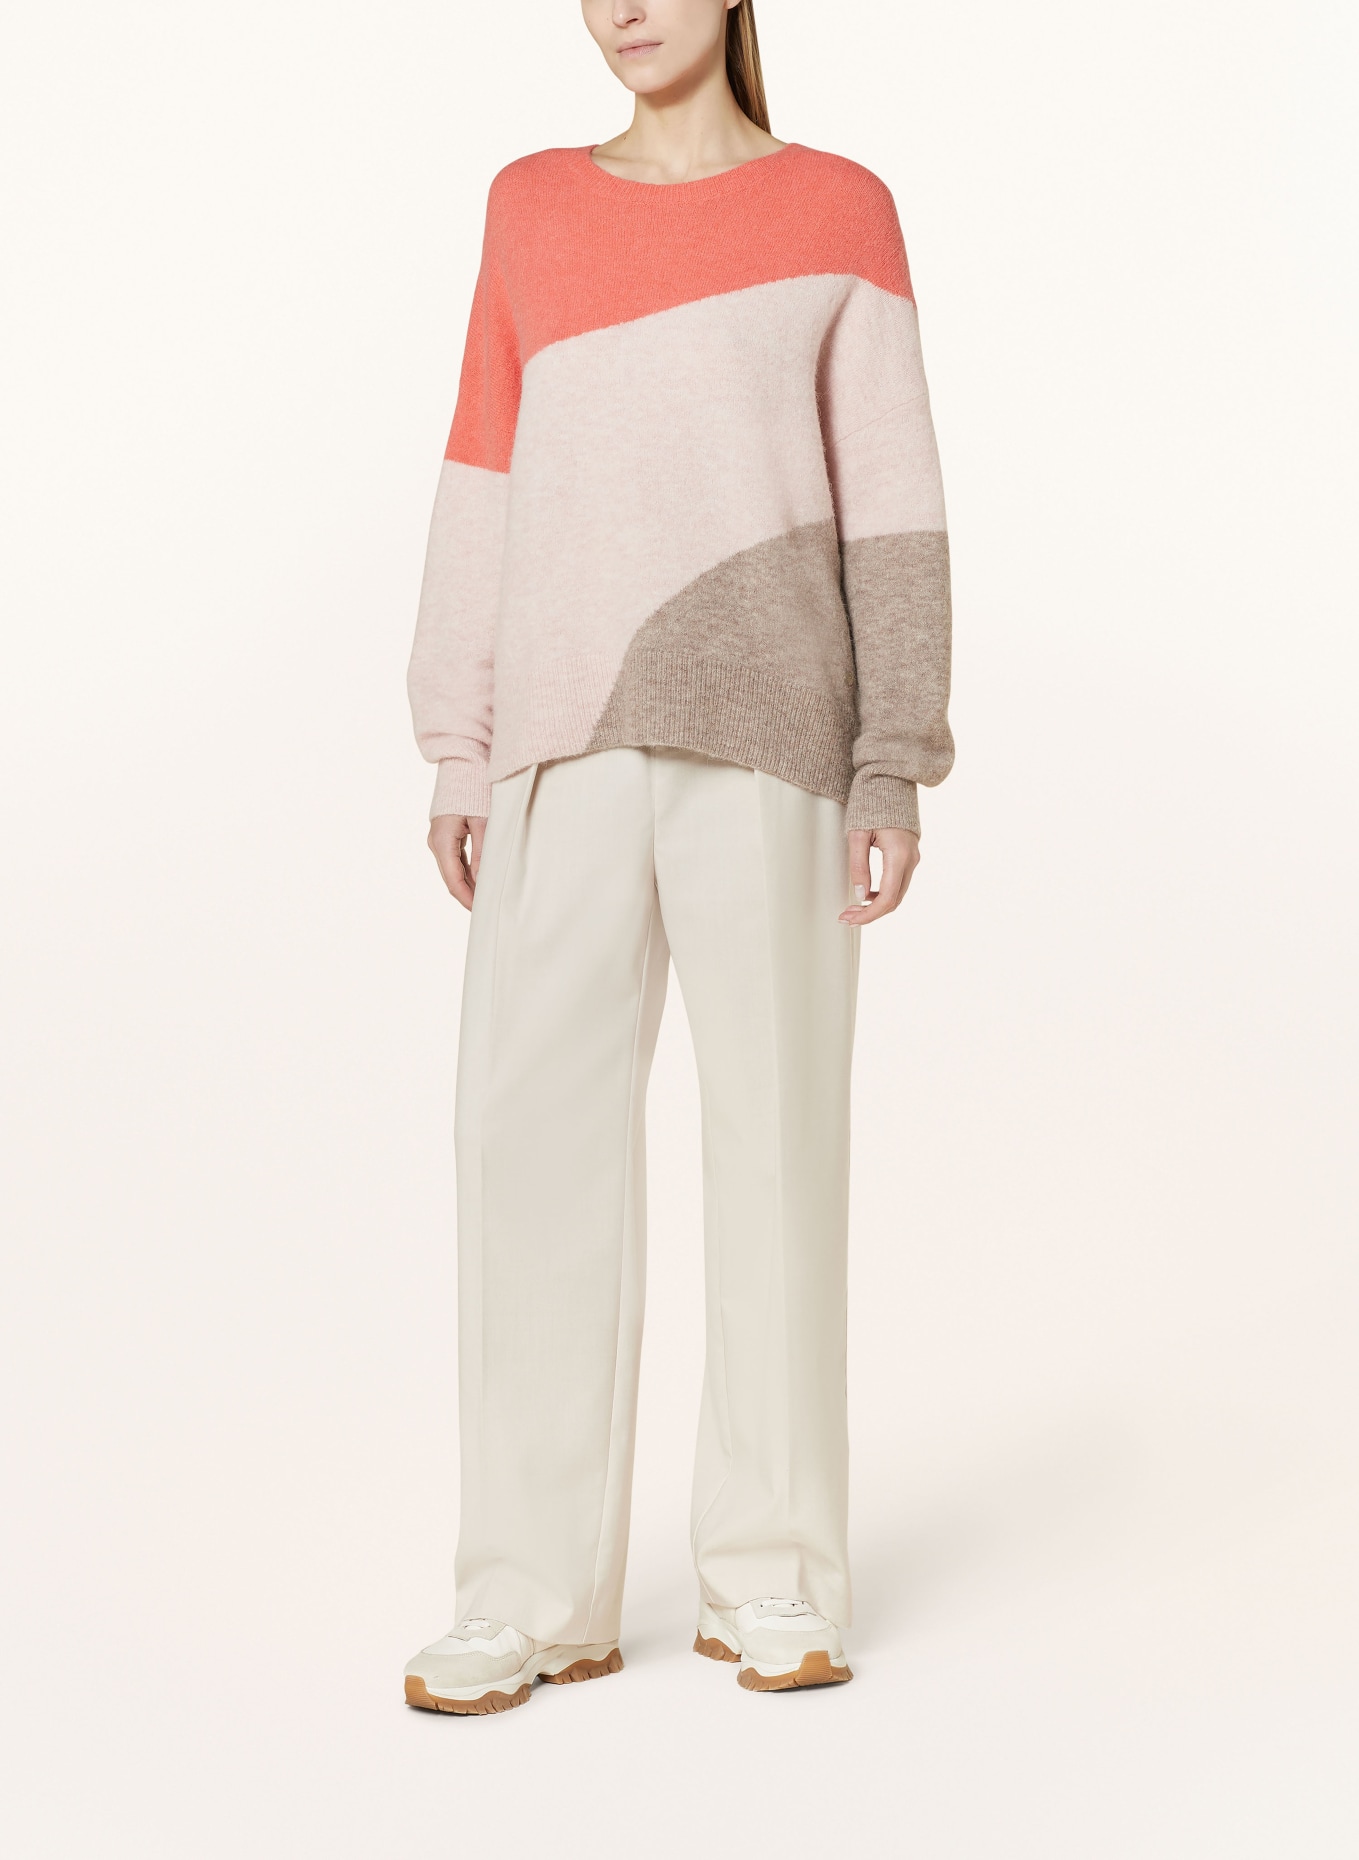 FYNCH-HATTON Sweater with alpaca, Color: LIGHT PINK/ LIGHT RED/ BEIGE (Image 2)